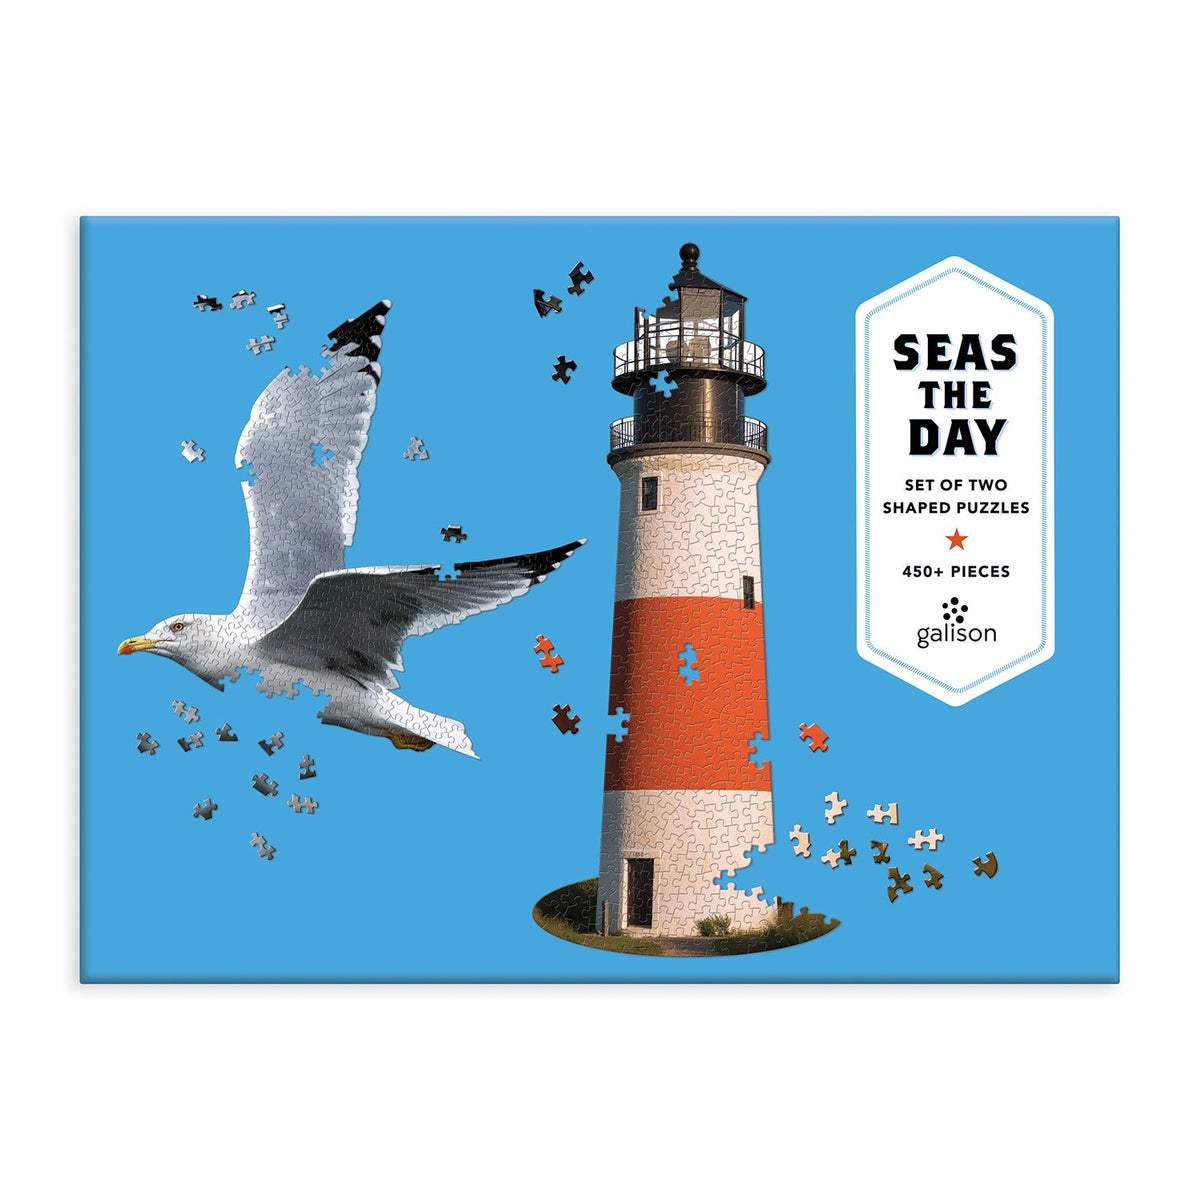 Seas The Day 2 in 1 Shaped Puzzle Shaped Puzzles Galison 